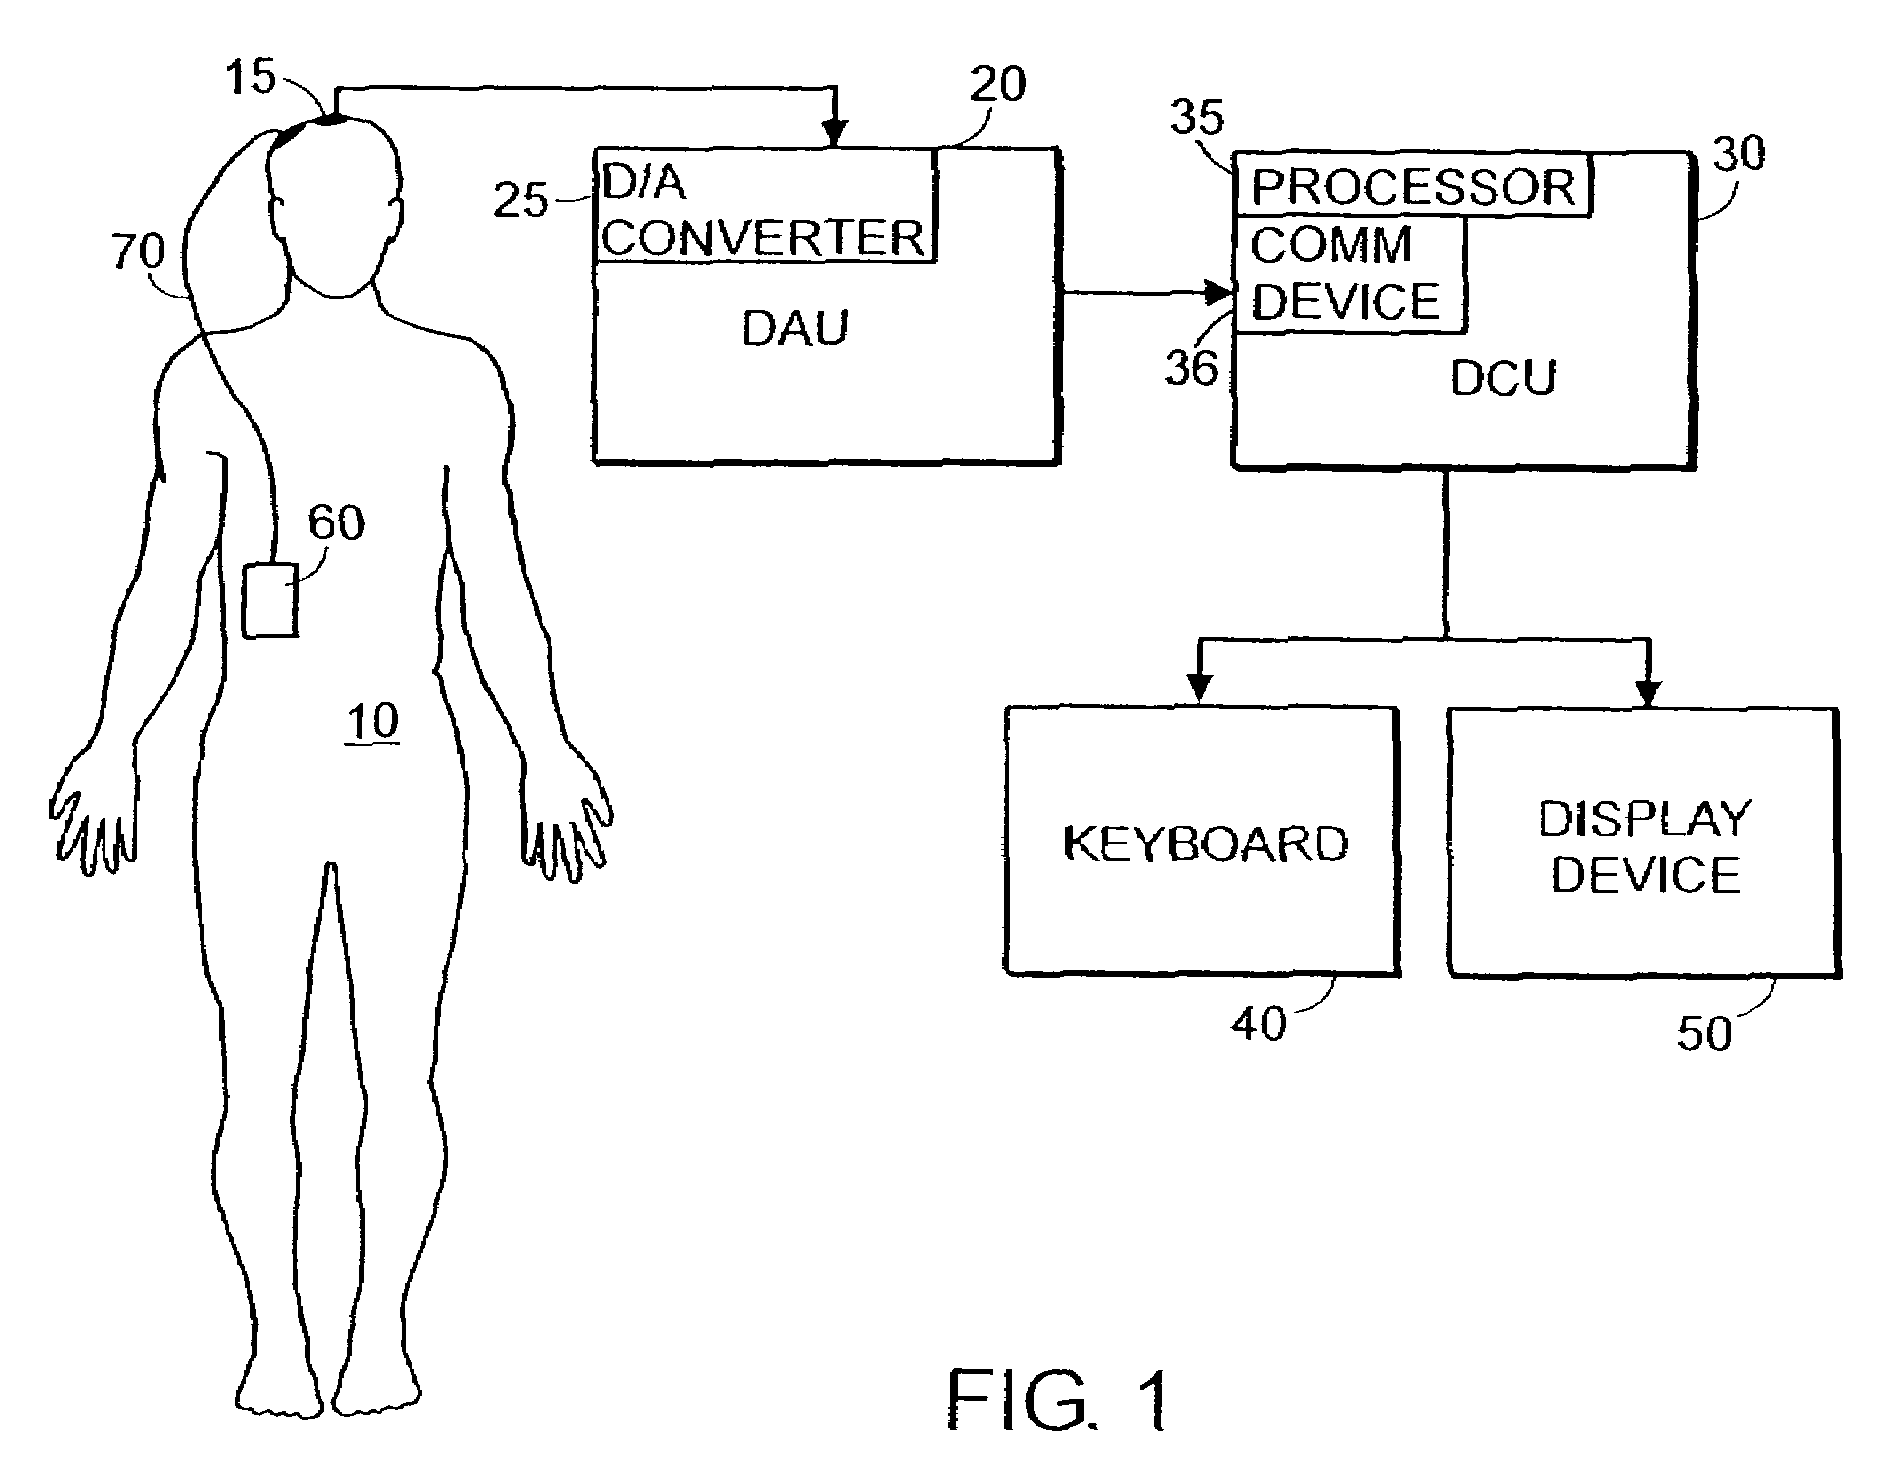 System and method of prediction of response to neurological treatment using the electroencephalogram